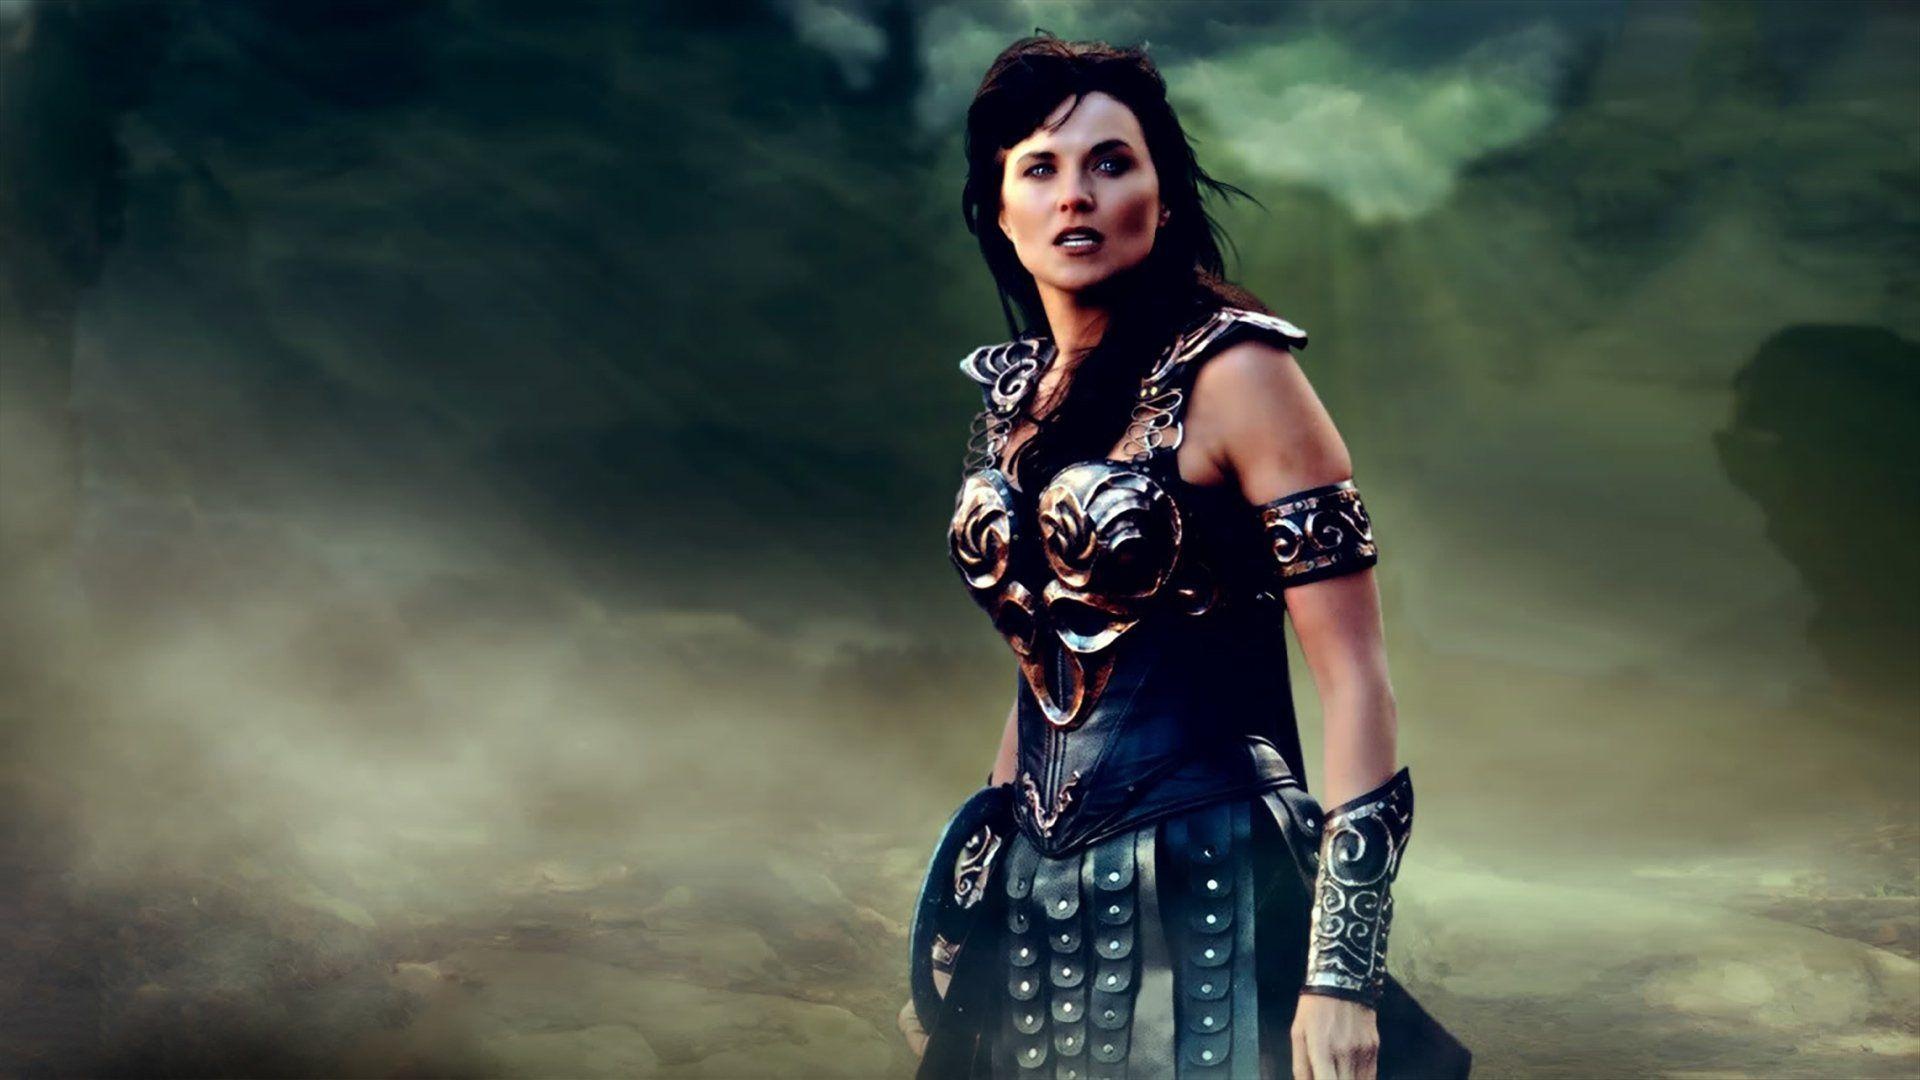 Xena: Warrior Princess (TV Series): Lucy Lawless, Raised as the daughter of Cyrene and Atrius in Amphipolis. 1920x1080 Full HD Wallpaper.